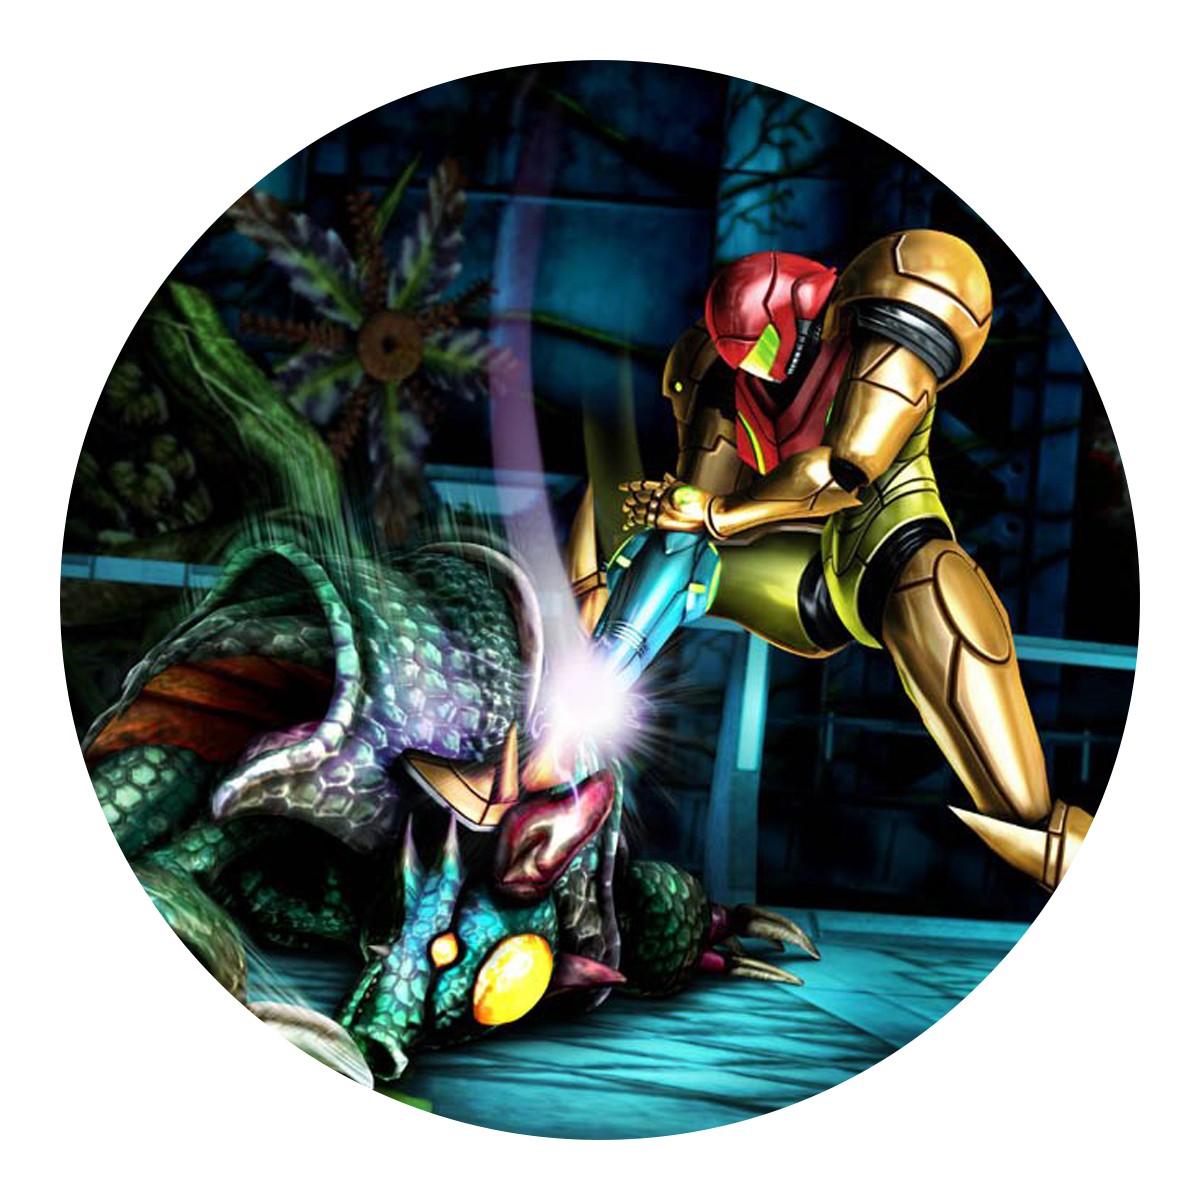 metroid-other-m-this-is-not-the-metroid-you-re-looking-for-by-rango-superjump-medium